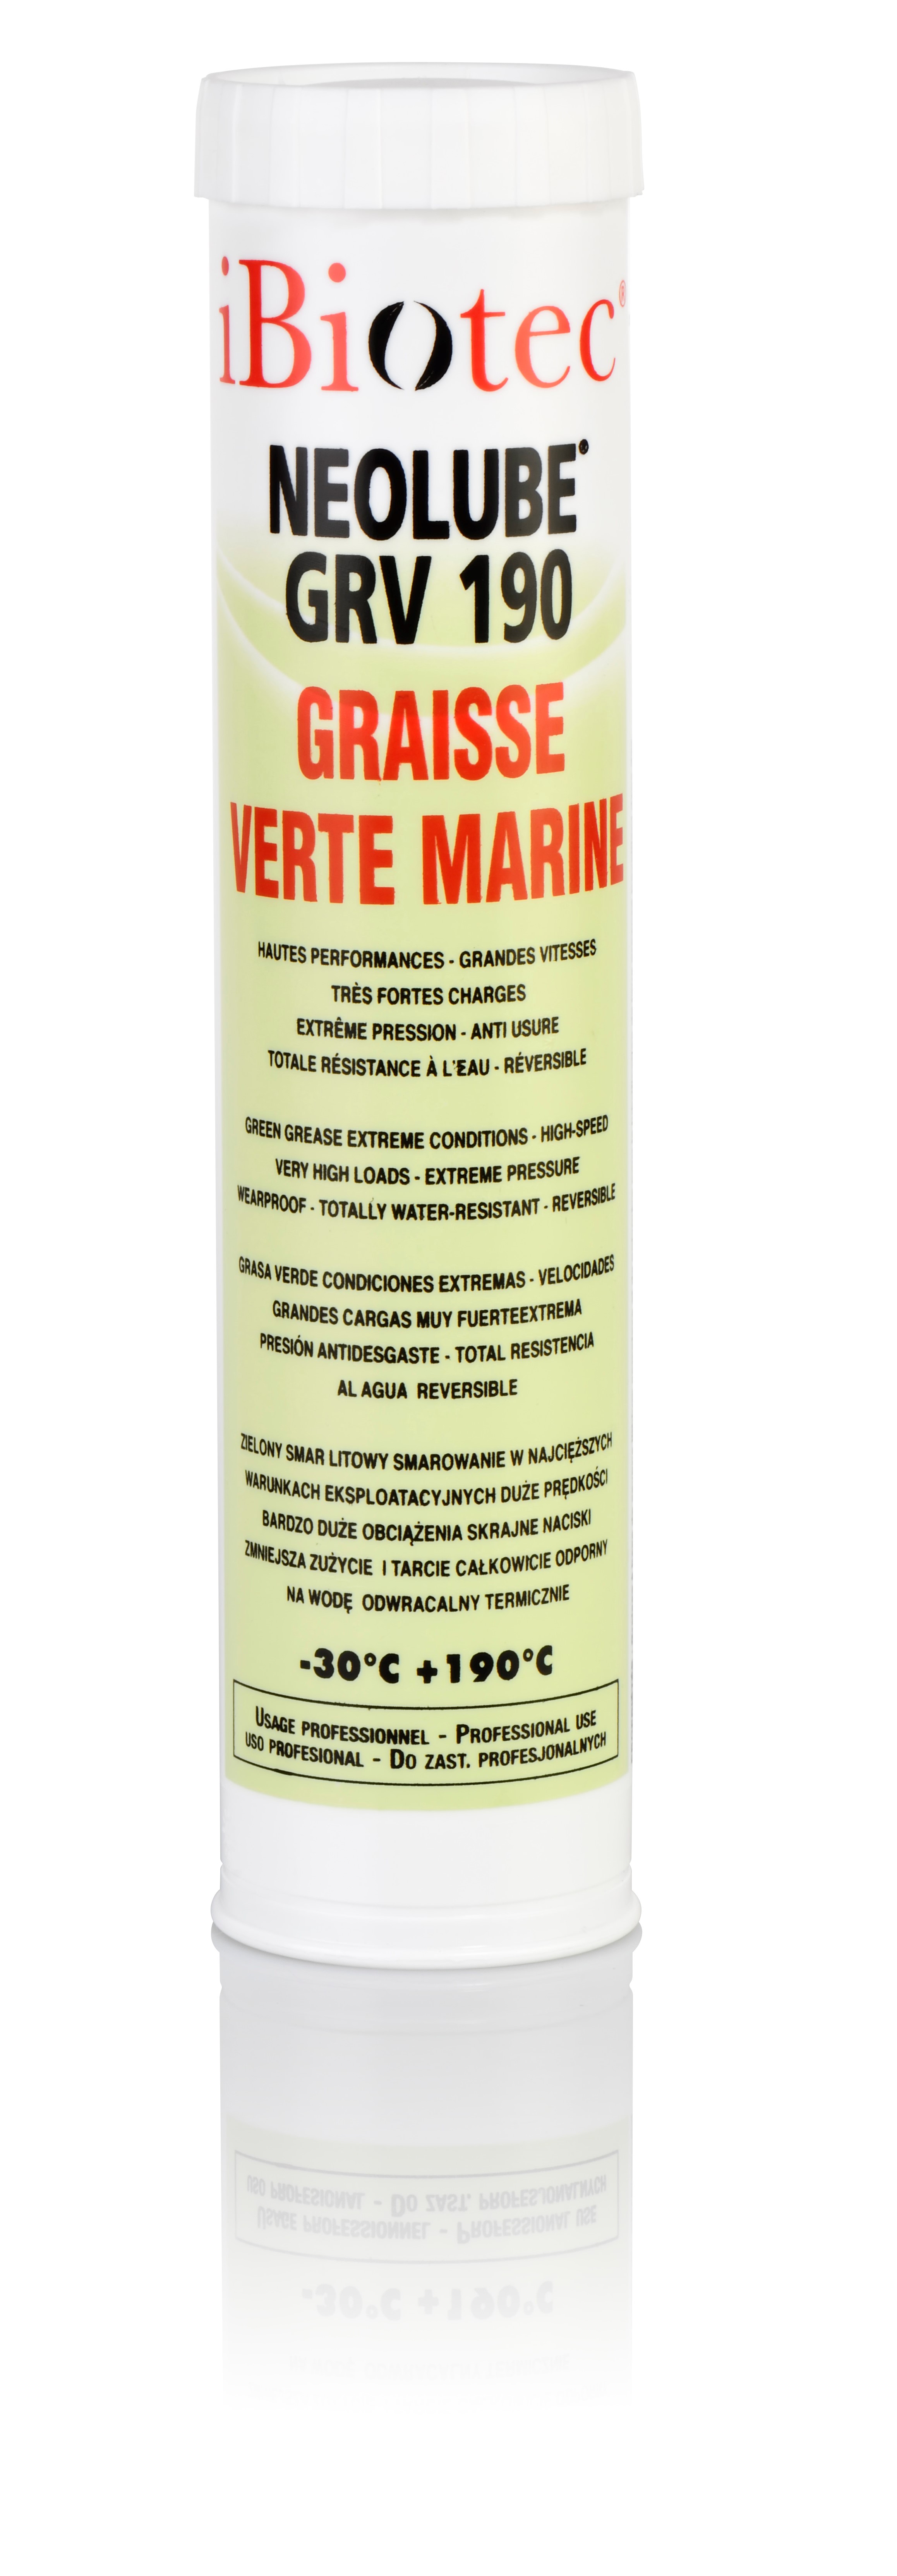 Marine grease, quarries grease, mines grease, lithium complex grease, marine grease spray, sub lubrication grease, under water grease, green marine grease for submerged lubrication or lubrication exposed to seawater spray. extreme pressure. anti-wear. adhesive. green marine grease, marine grease, lithium grease, multi-purpose lithium grease, multi-purpose grease, grease aerosol, multi-purpose spray, multi-purpose grease in a spray can, high-speed grease, technical grease, industrial grease, adhesive grease, special marine grease. technical grease suppliers. industrial grease suppliers. industrial lubricant suppliers. technical grease manufacturers. industrial grease manufacturers. industrial lubricant manufacturers. Marine grease NATO G 460